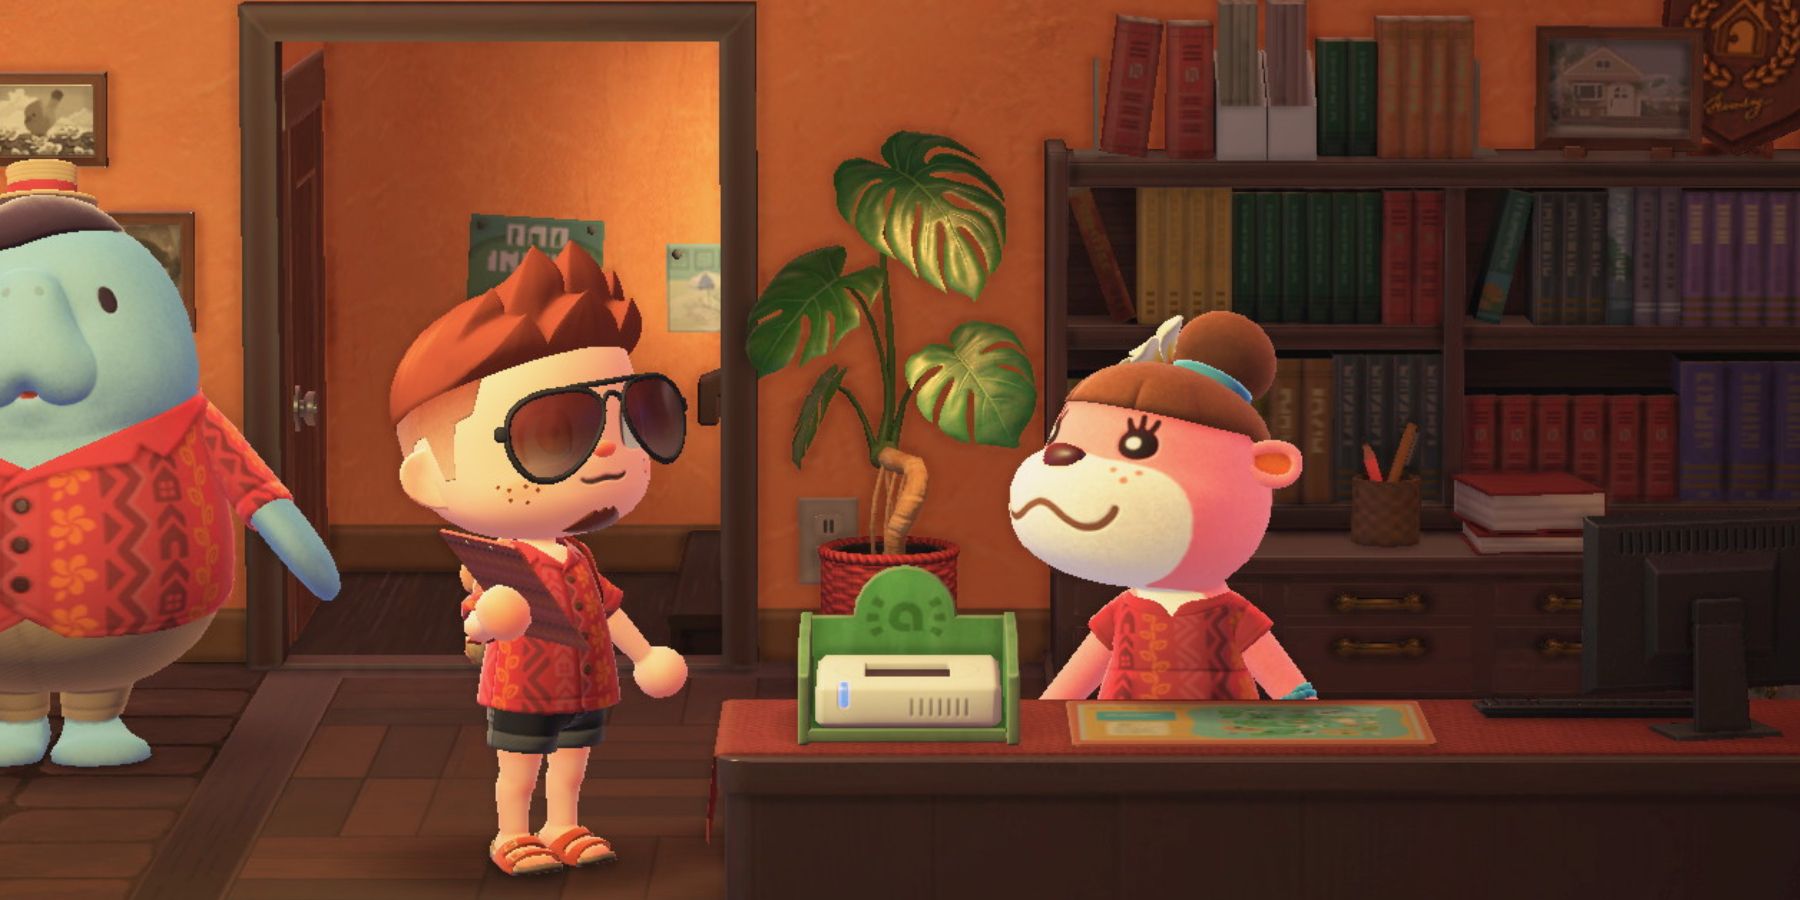 The Amiibo scanner in the Paradise Planning office in Animal Crossing: New Horizons Happy Home Paradise